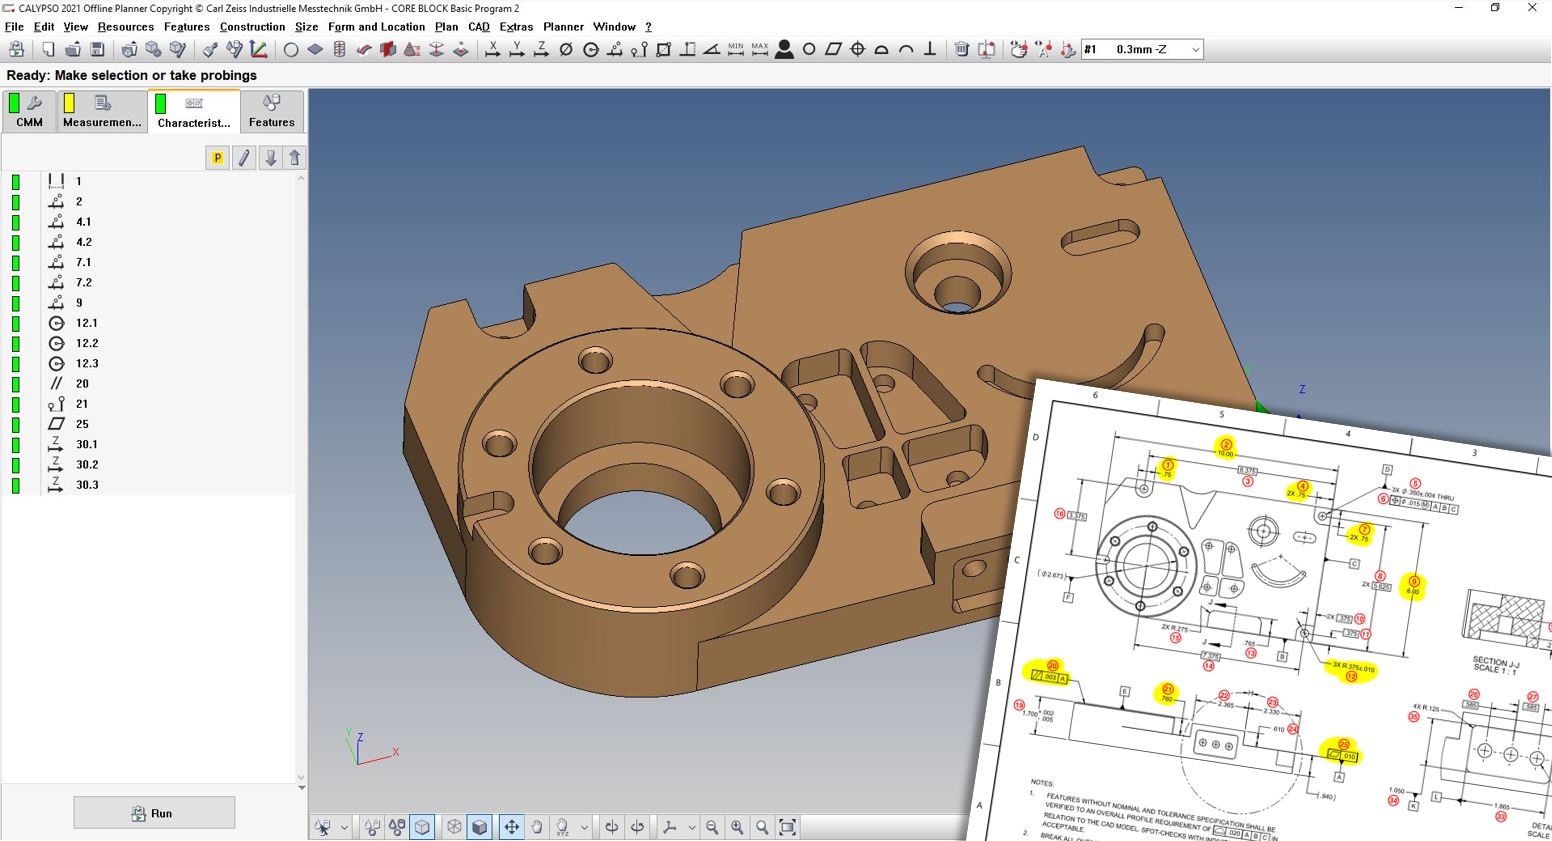 Learn Zeiss Calypso CMM programming on your own schedule